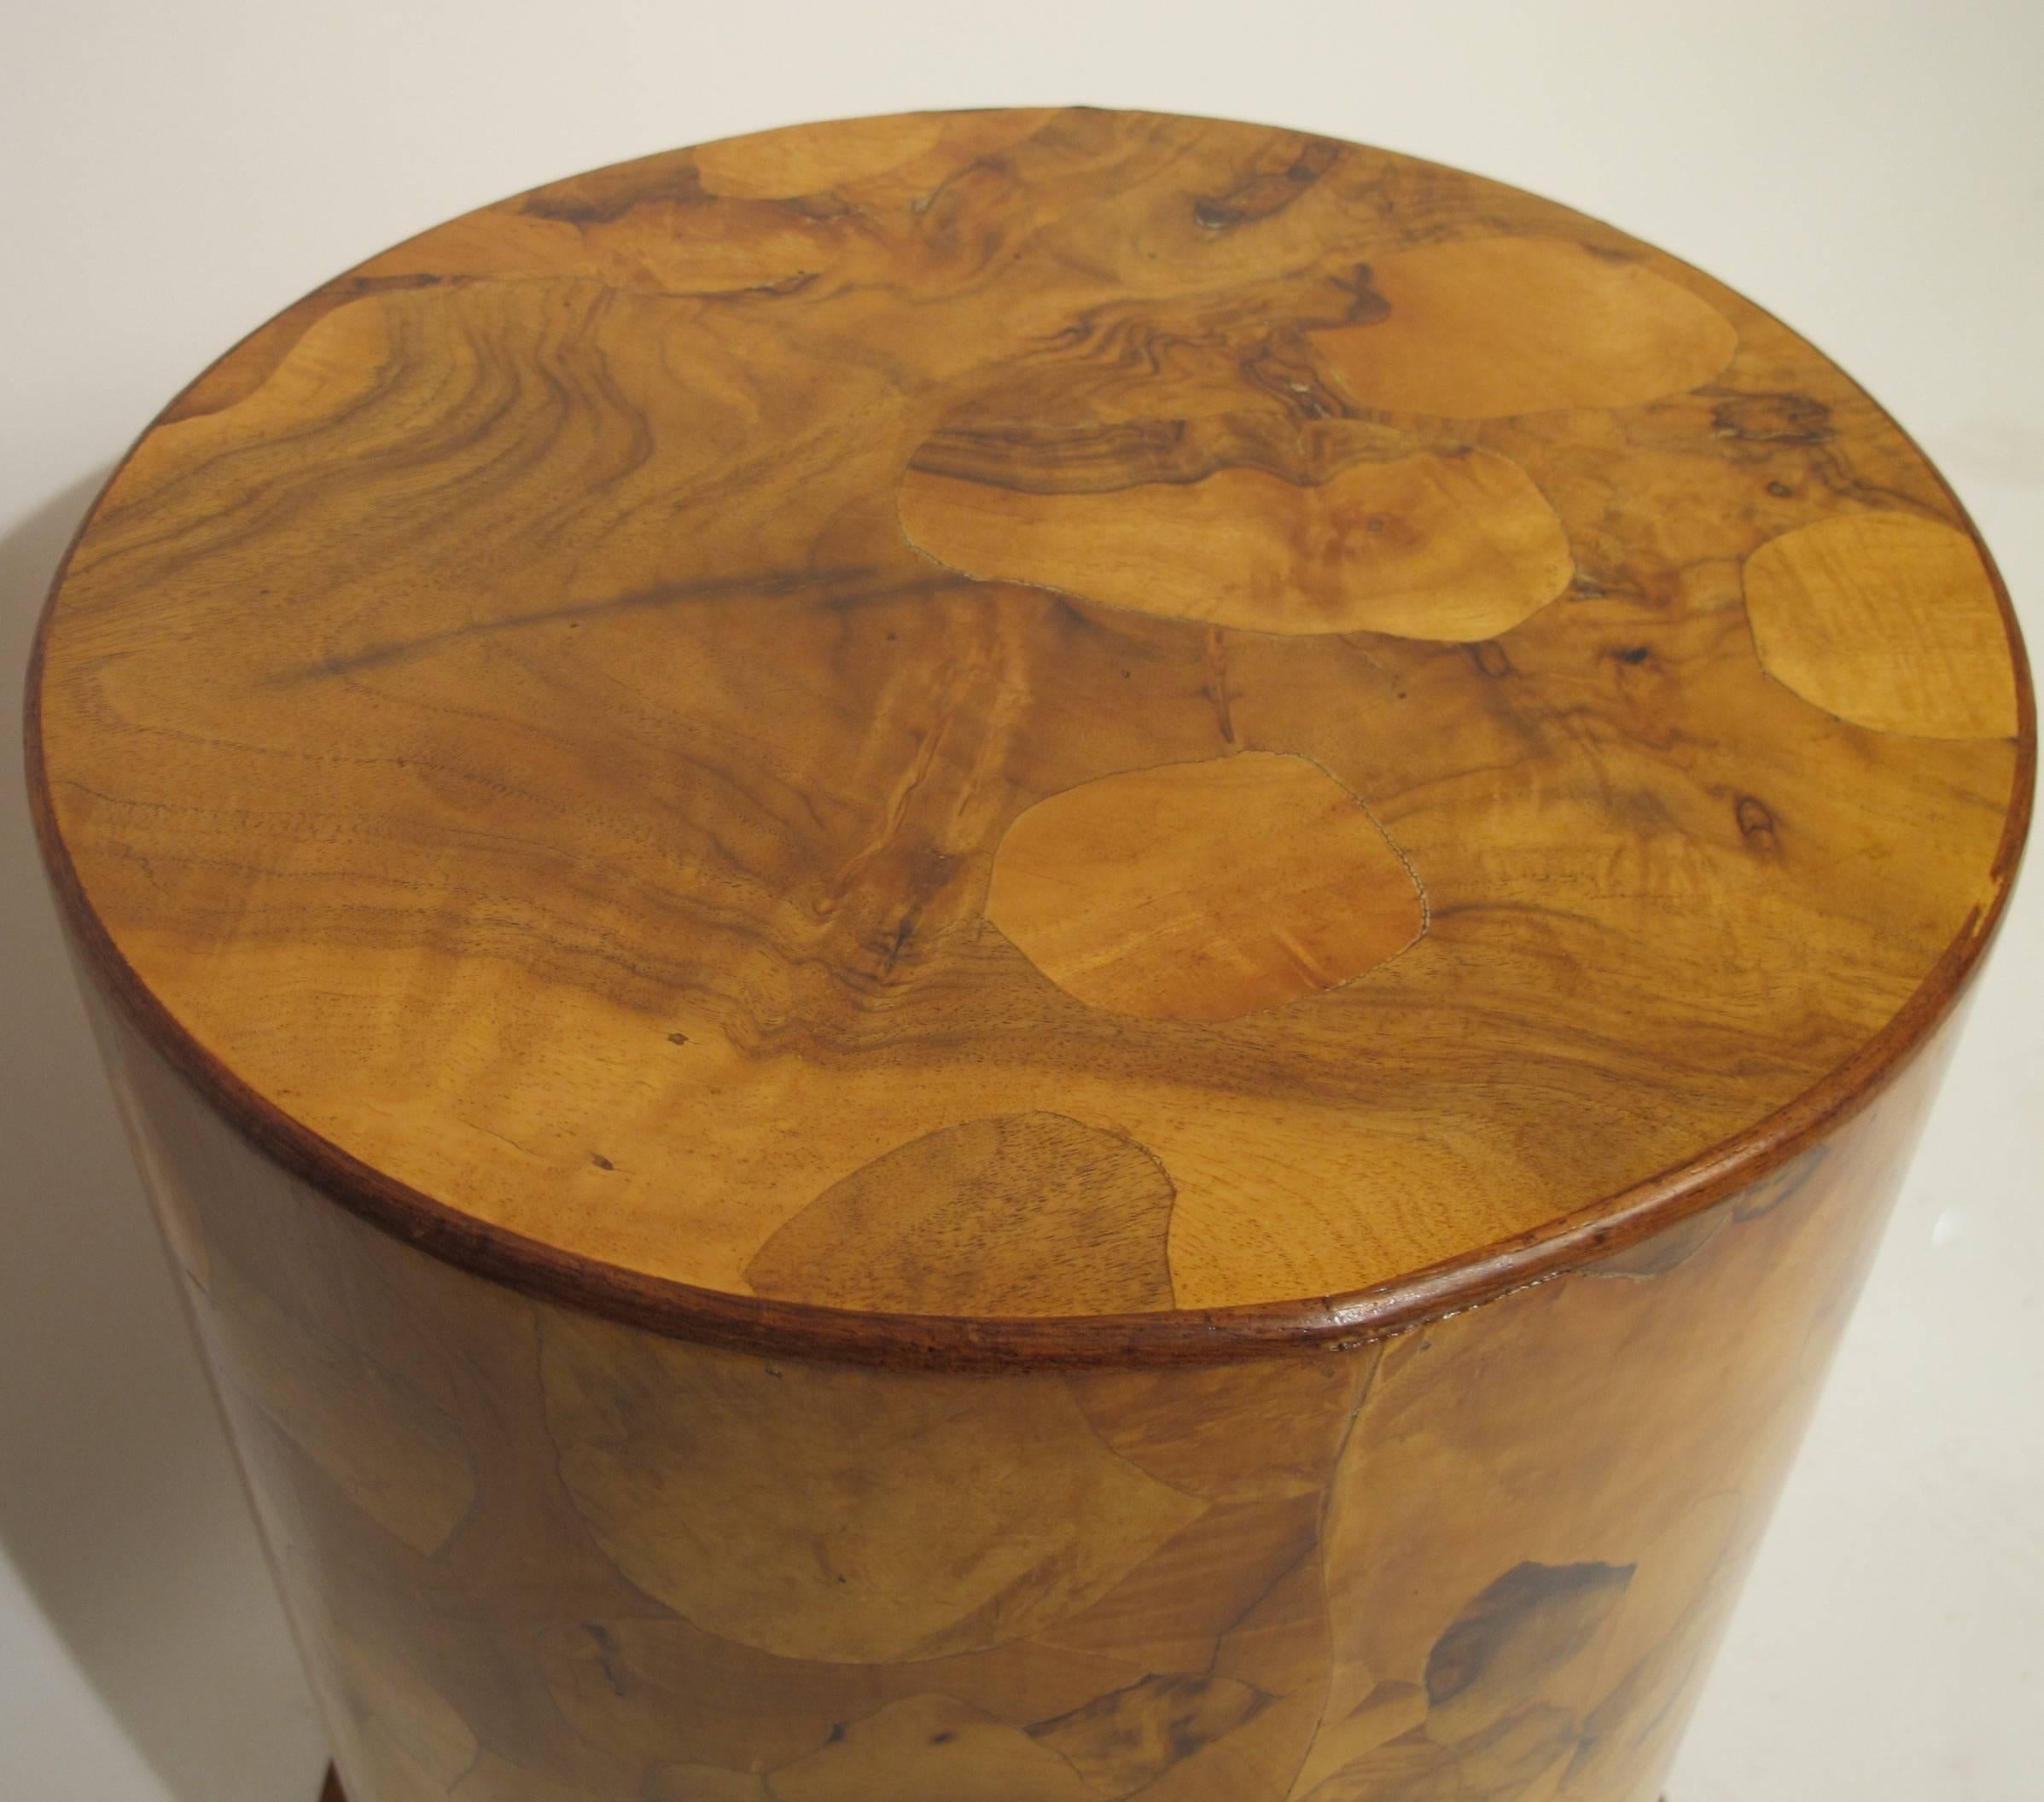 Italian pedestal with mixed fruitwood patchwork veneer. Recently refinished and in beautiful condition. The top diameter of the pedestal measures 15.25 inches. Italy, 1950's-1960's.